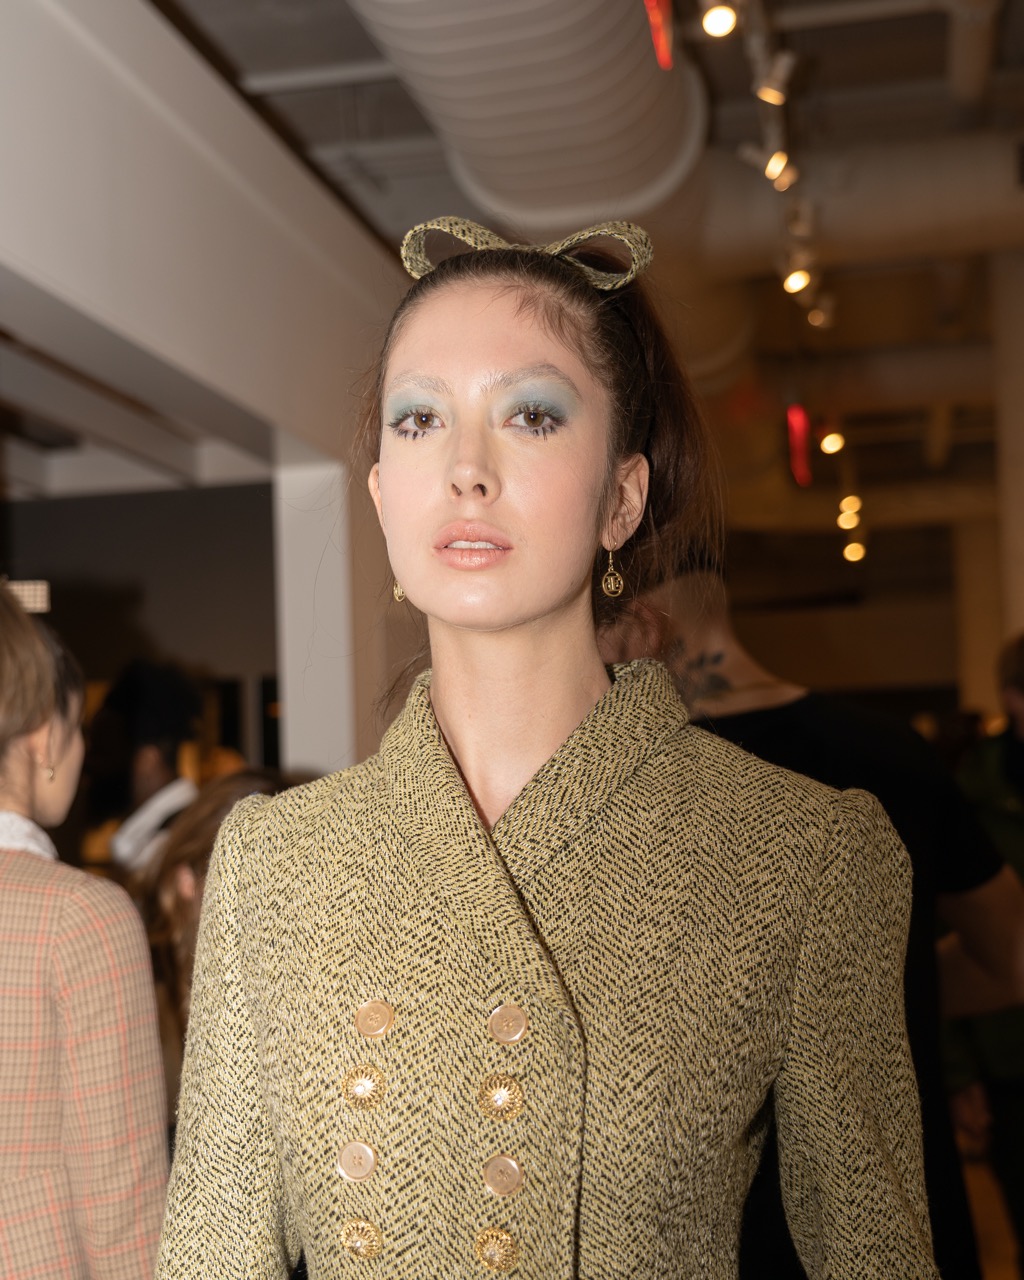 A photograph of a model looking into the camera, wearing blue eyeshadow, a muted yellow tweed jacket, and a matching bow on her head.